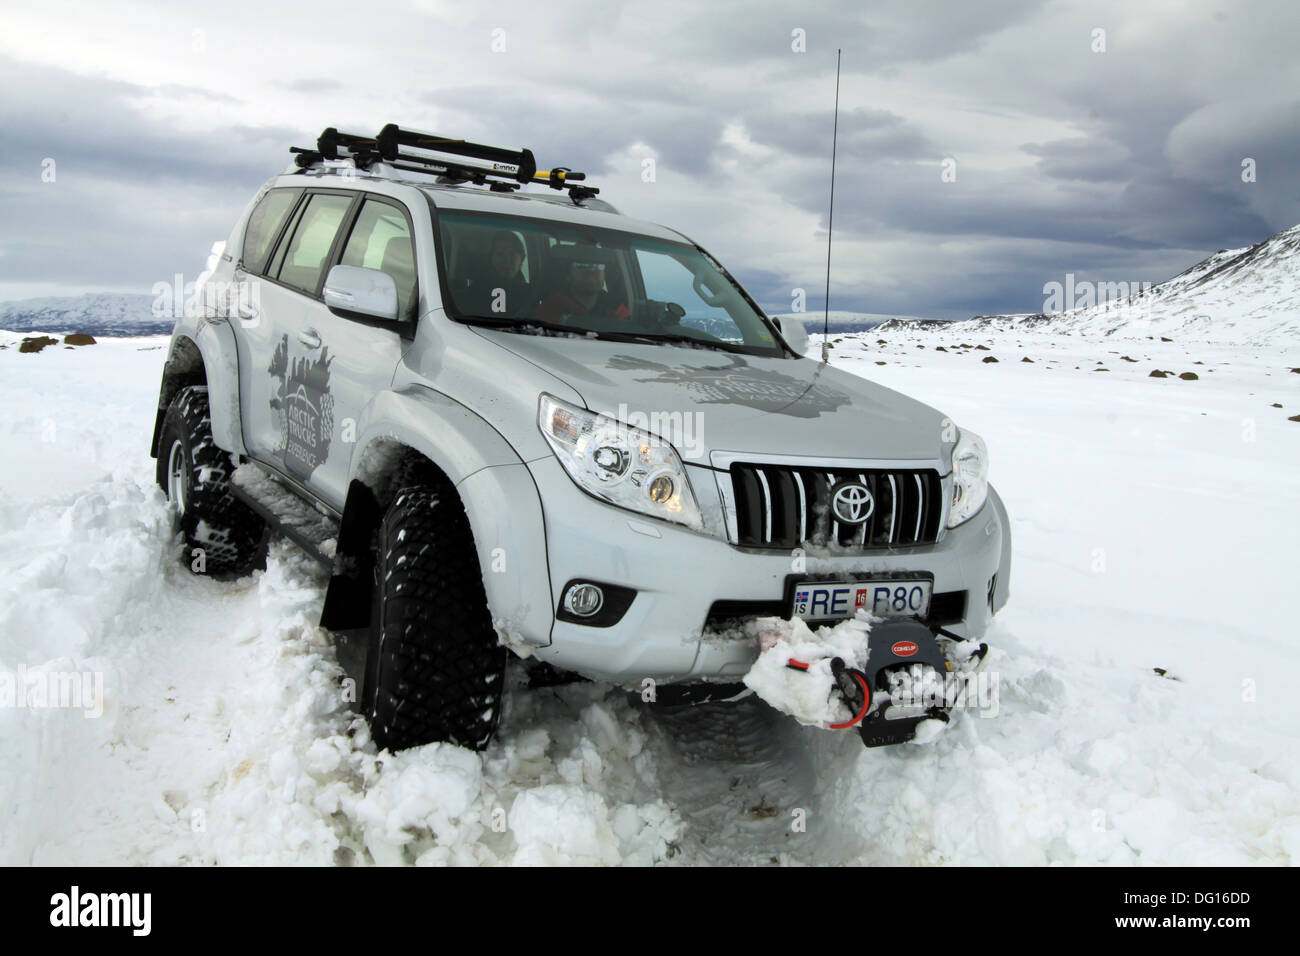 Arctic trucks heavily modified Toyota Landcruiser driving on snow in Iceland Stock Photo